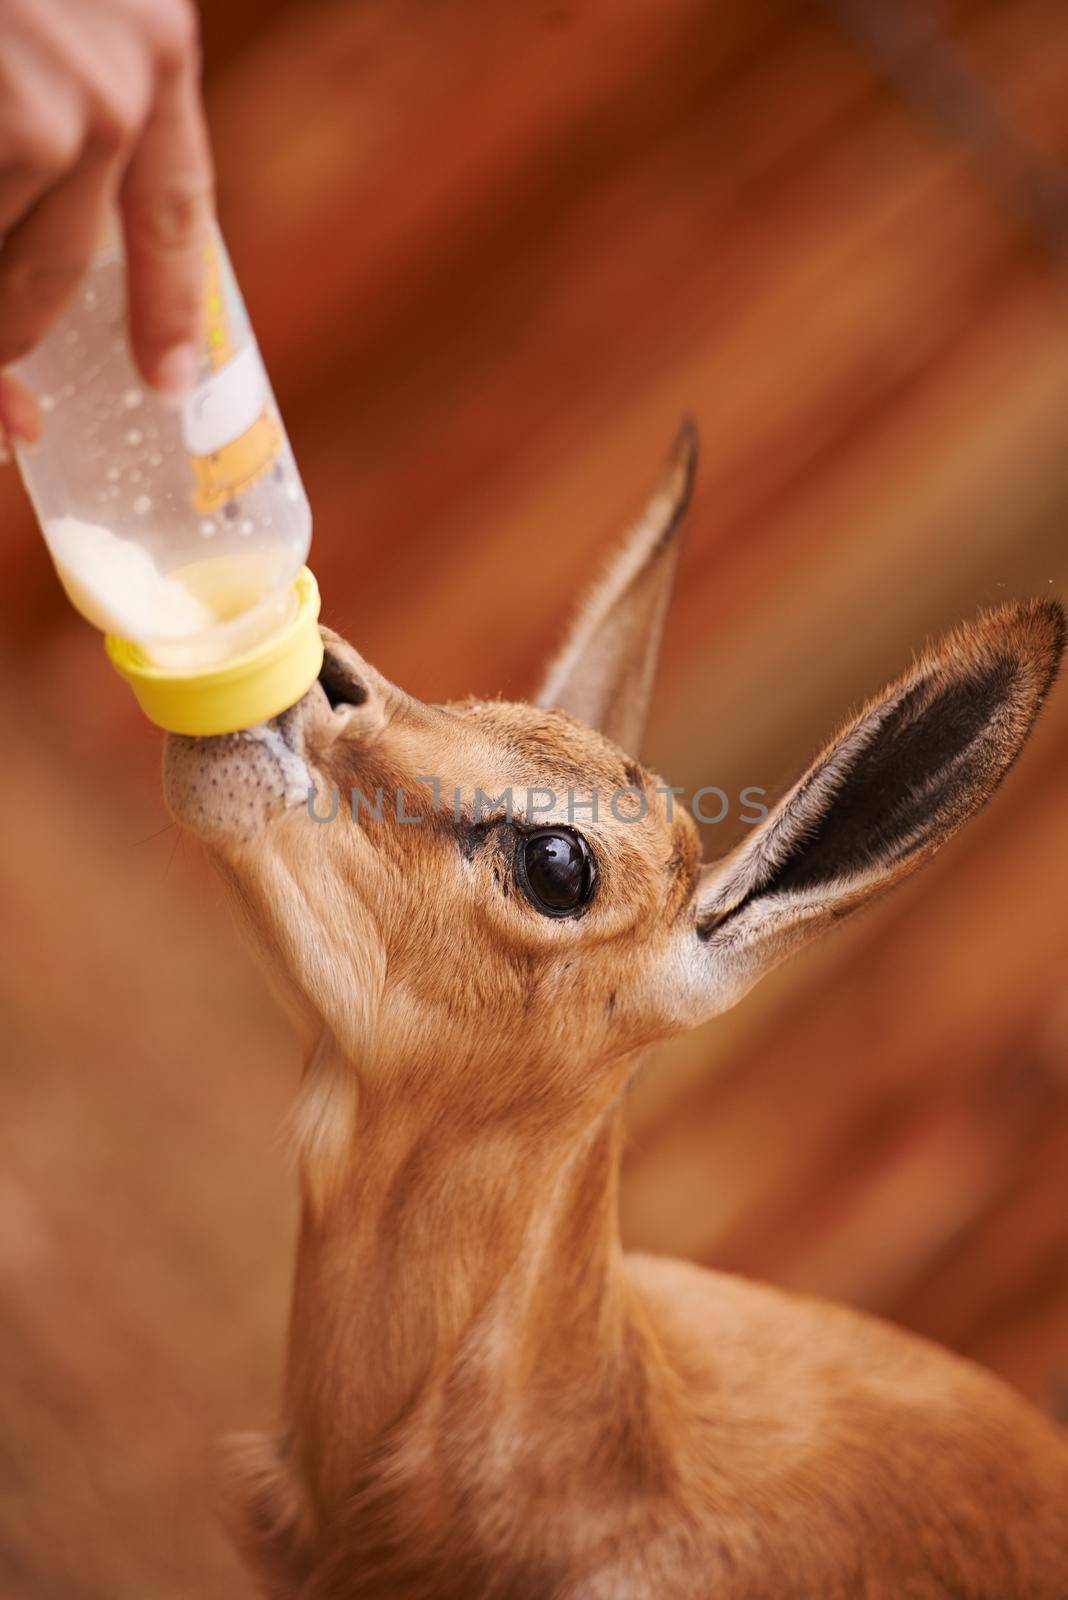 Cropped view of a baby springbok being bottle-fed.